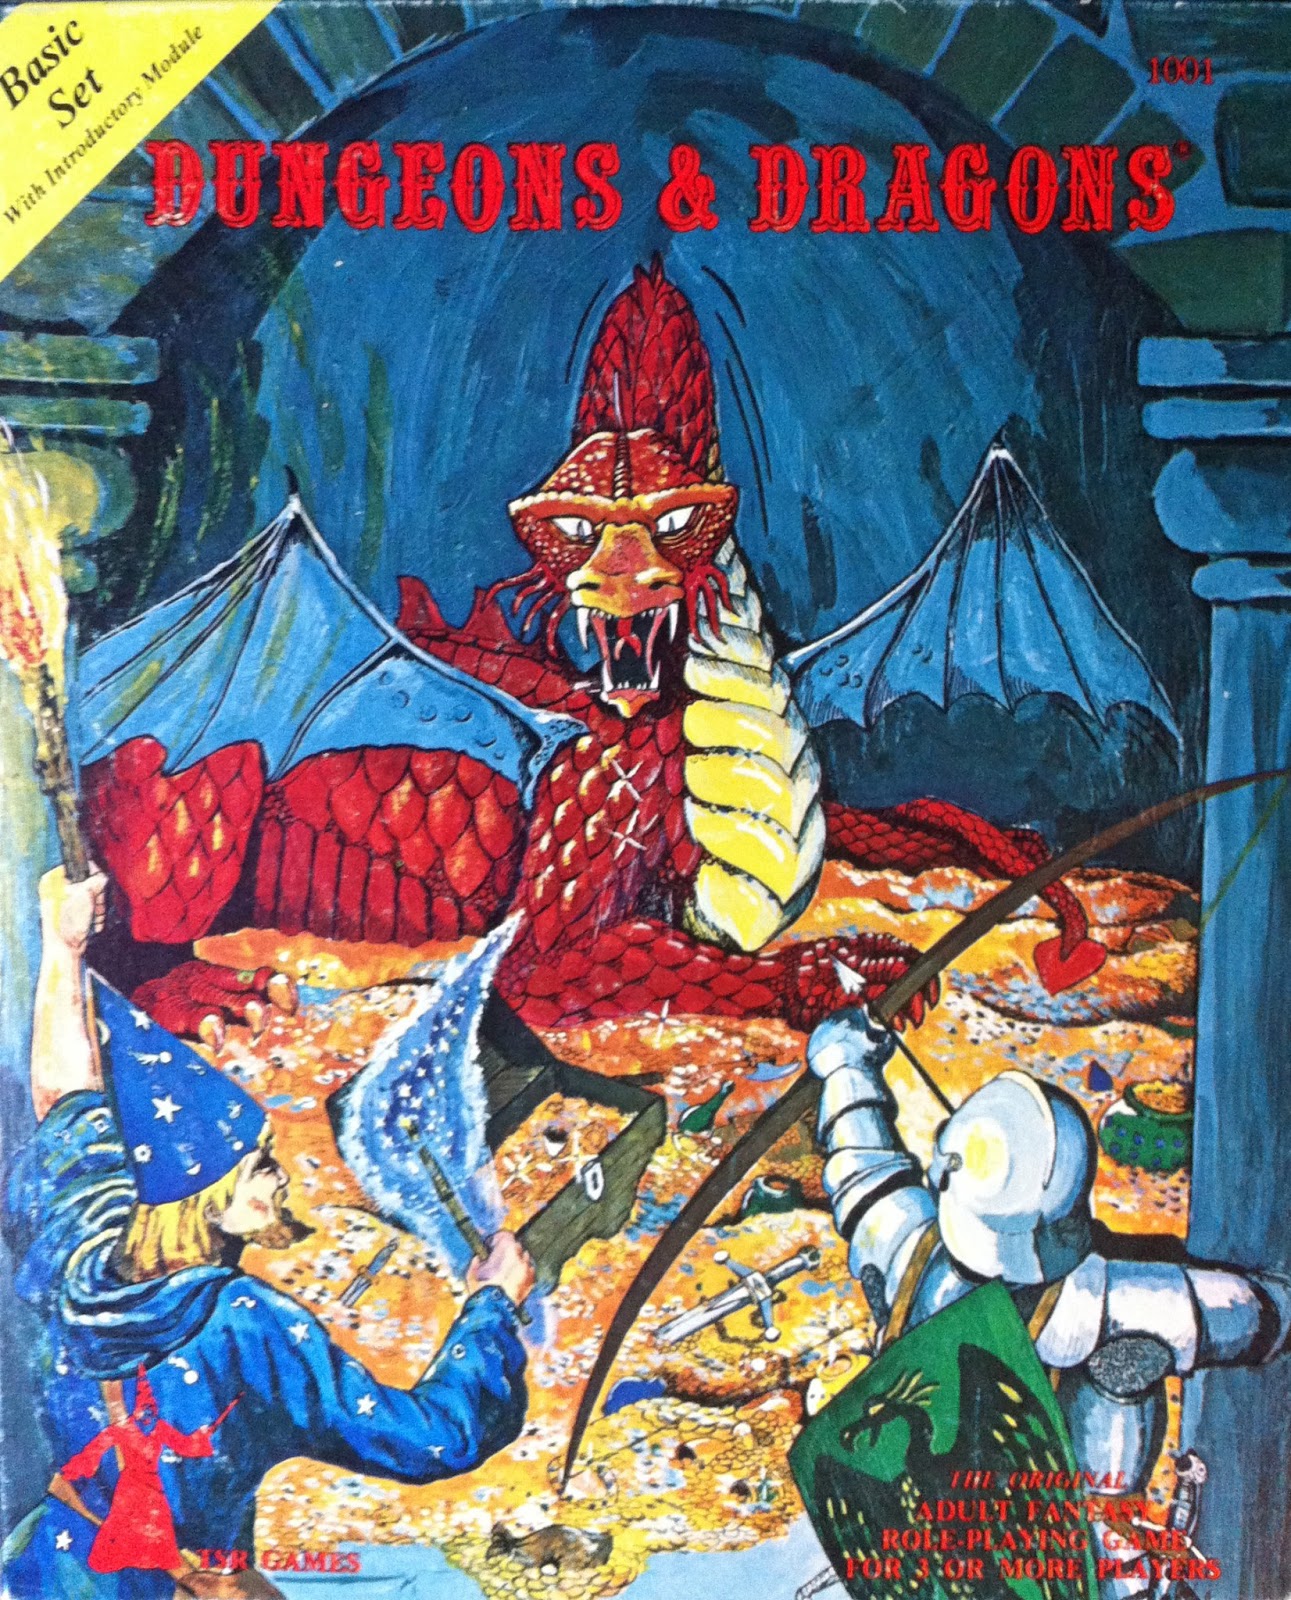 through-the-ages-dungeons-dragons-cover-art-shane-plays